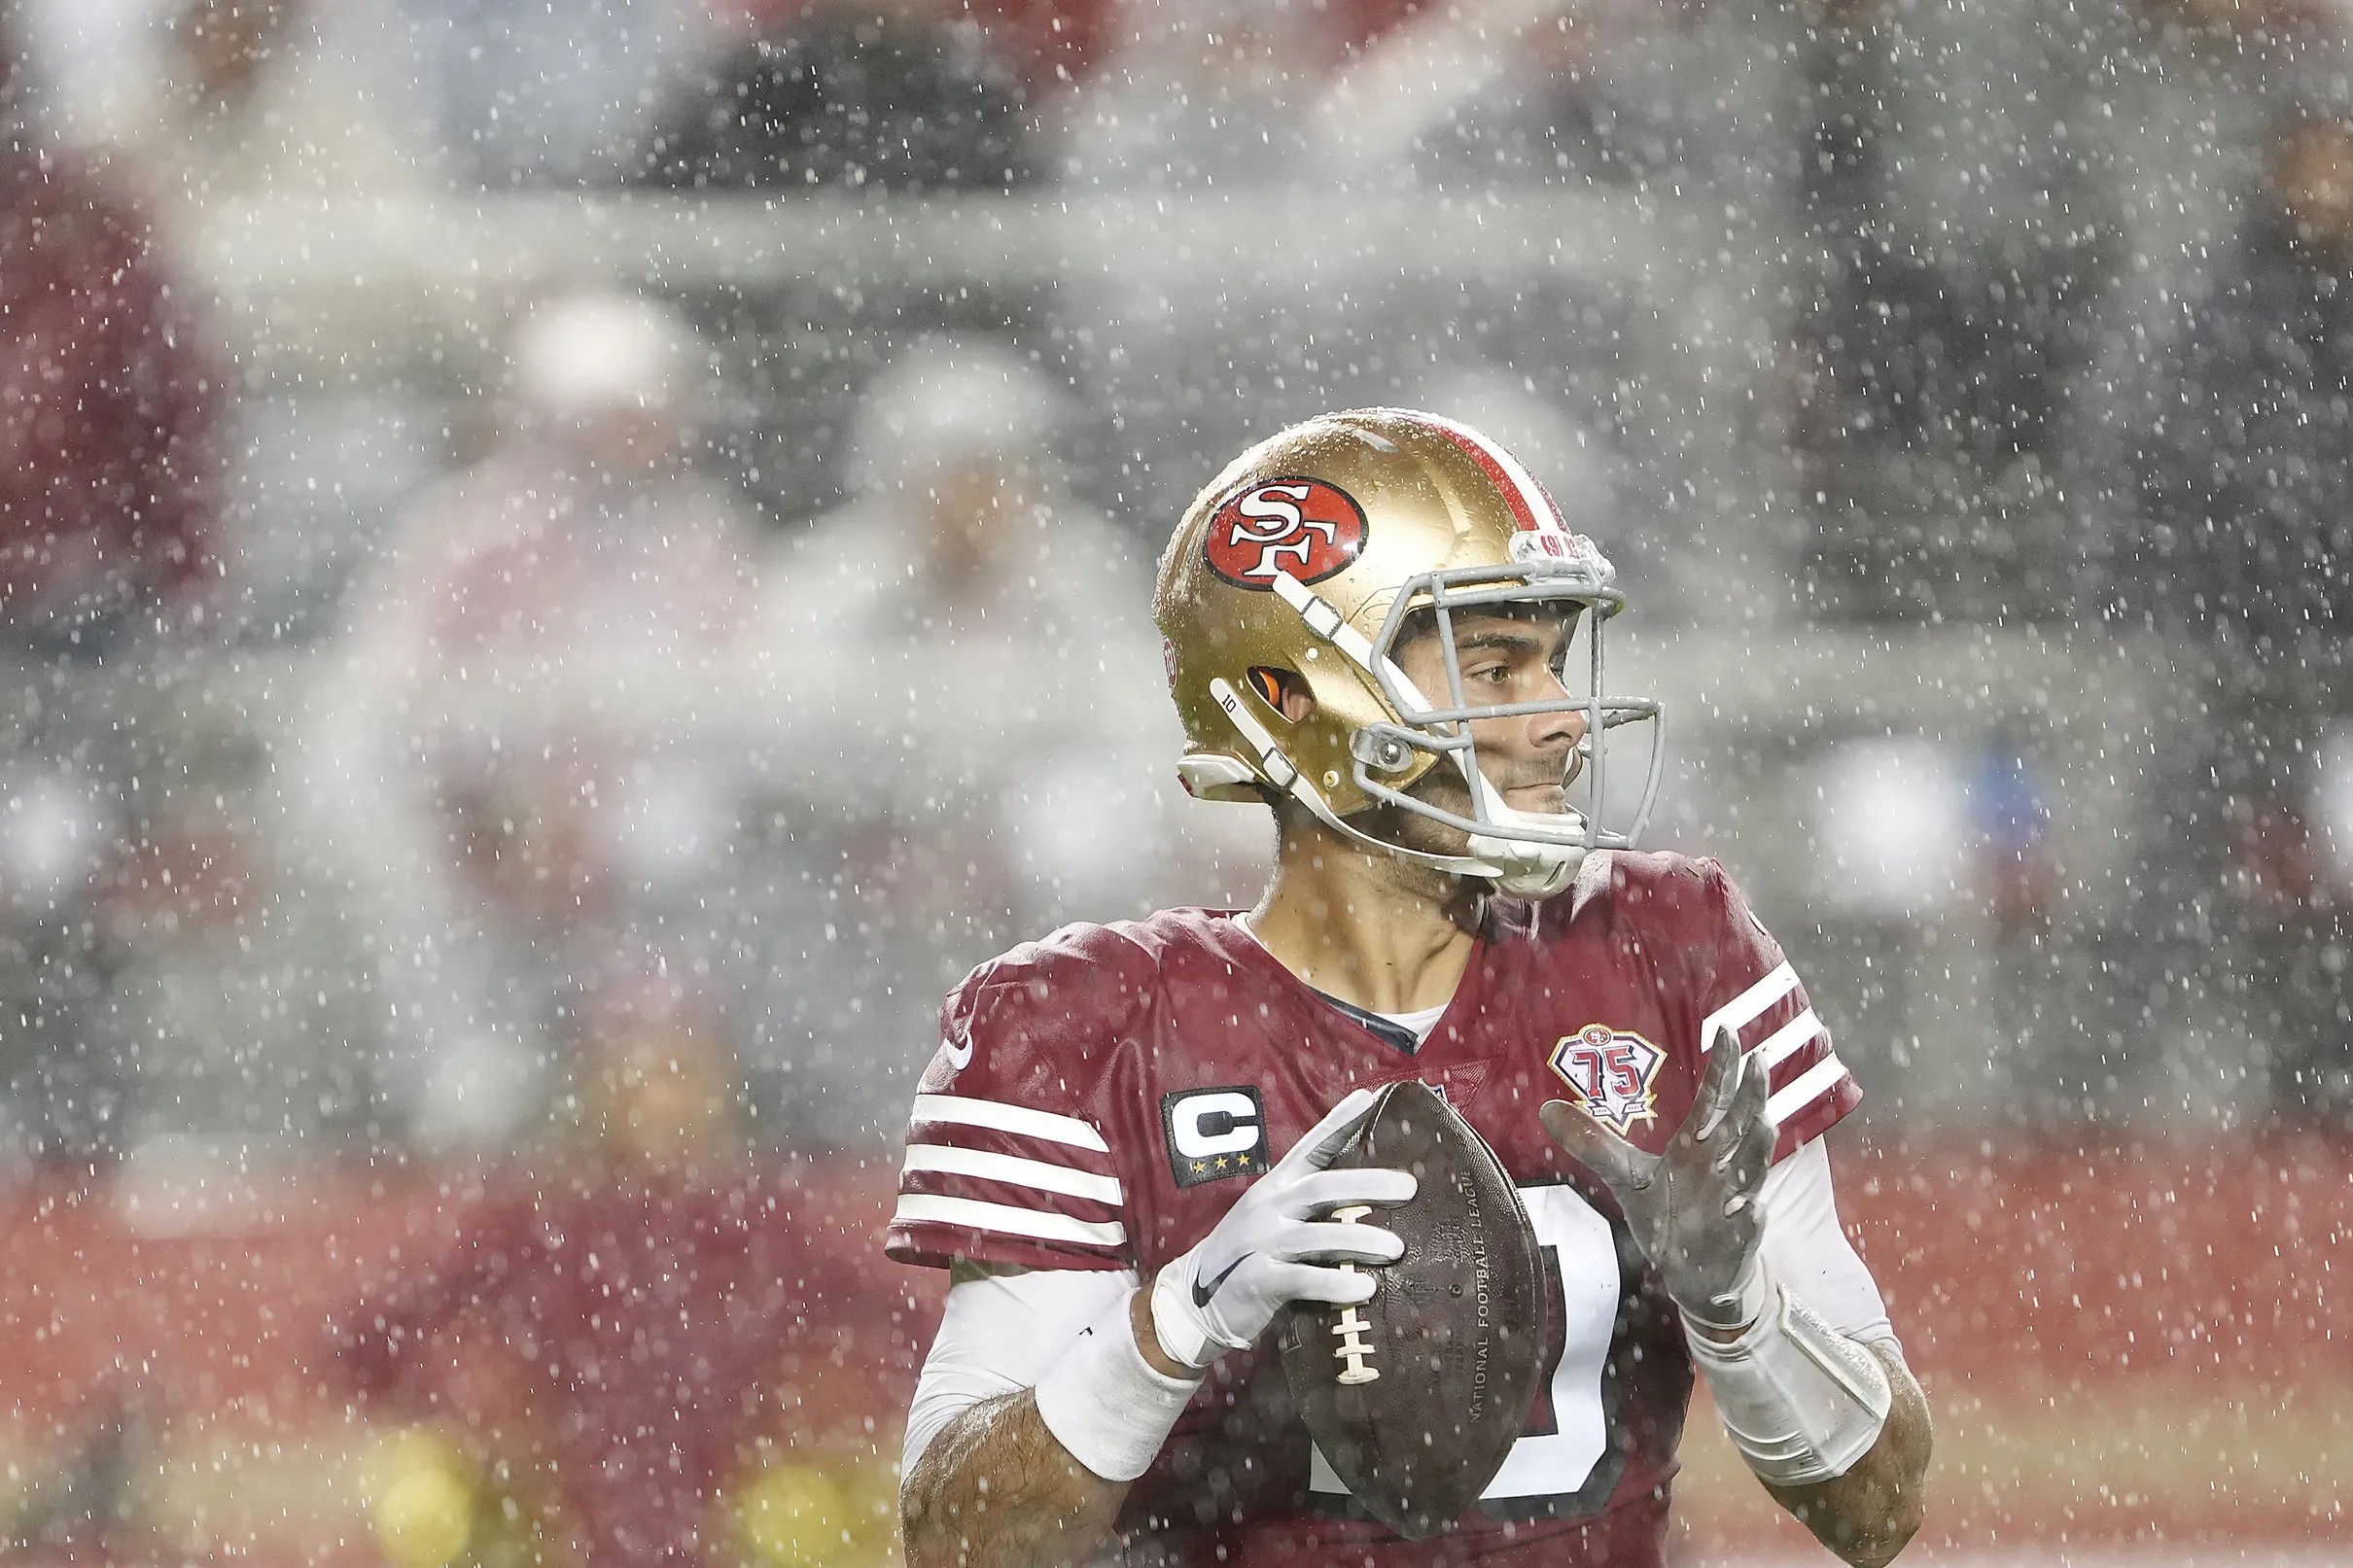 49ers vs. Colts snap counts Garoppolo had three turnover worthy plays